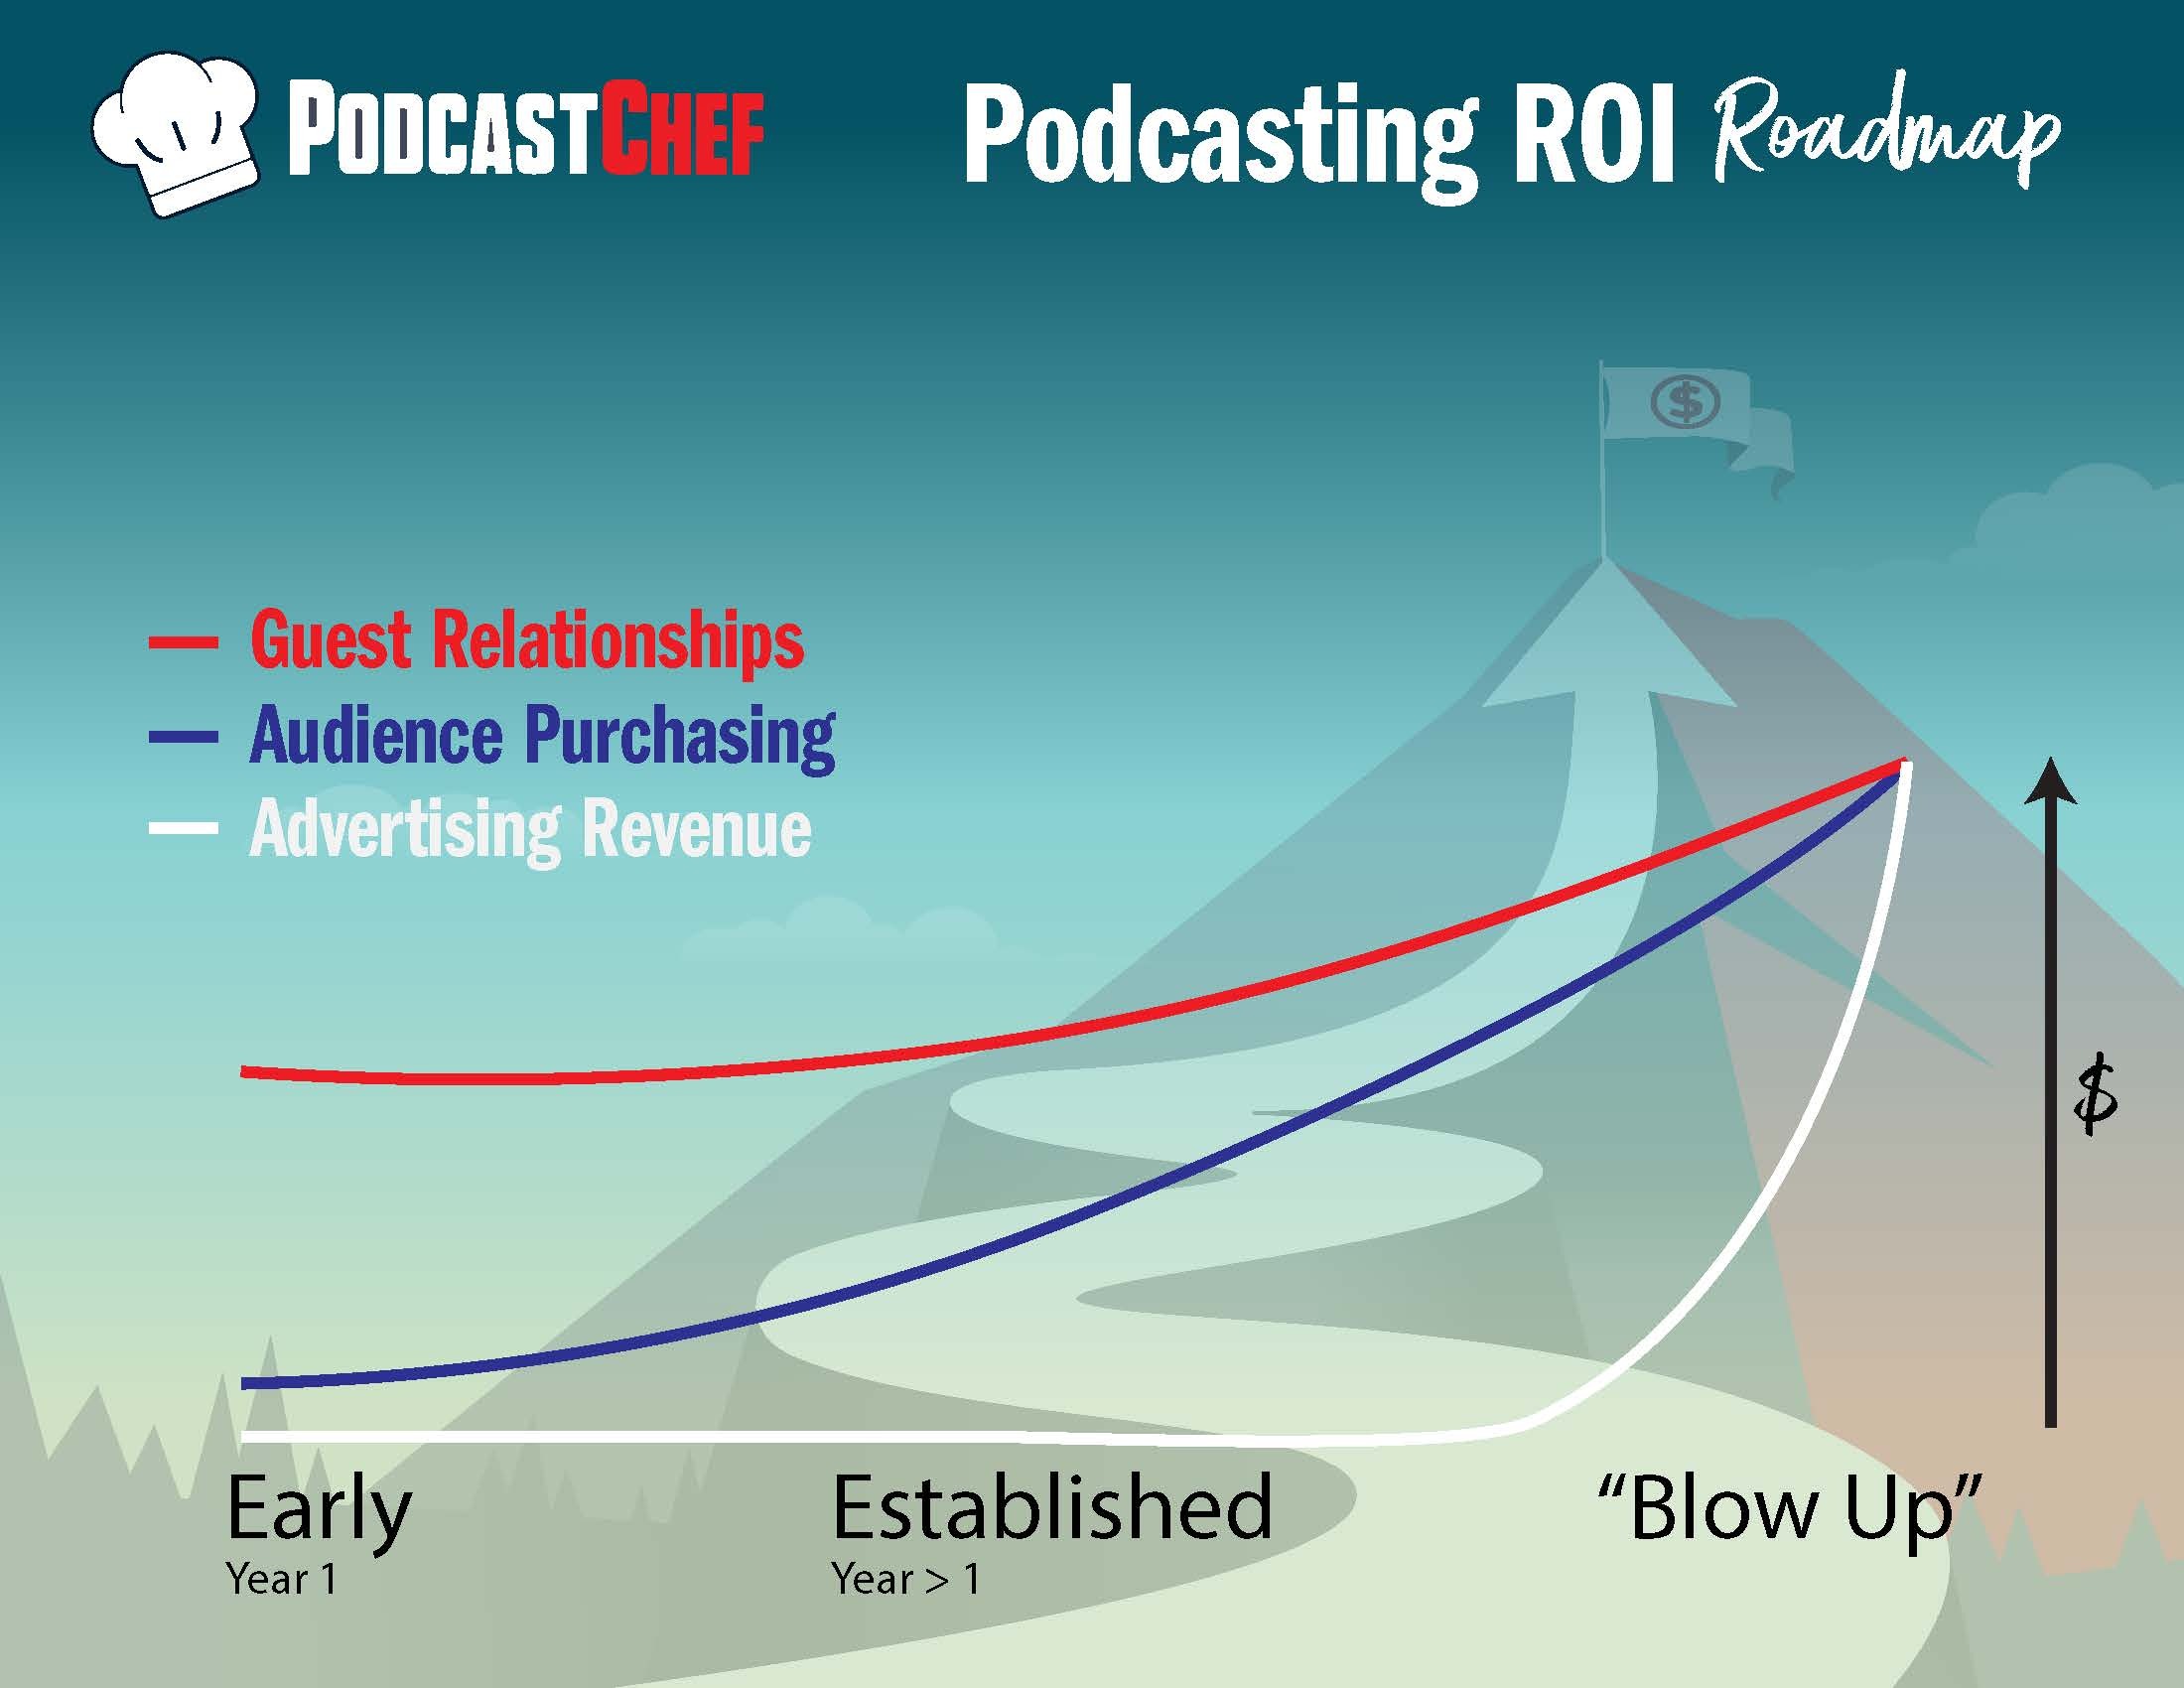 Podcasting for network growth